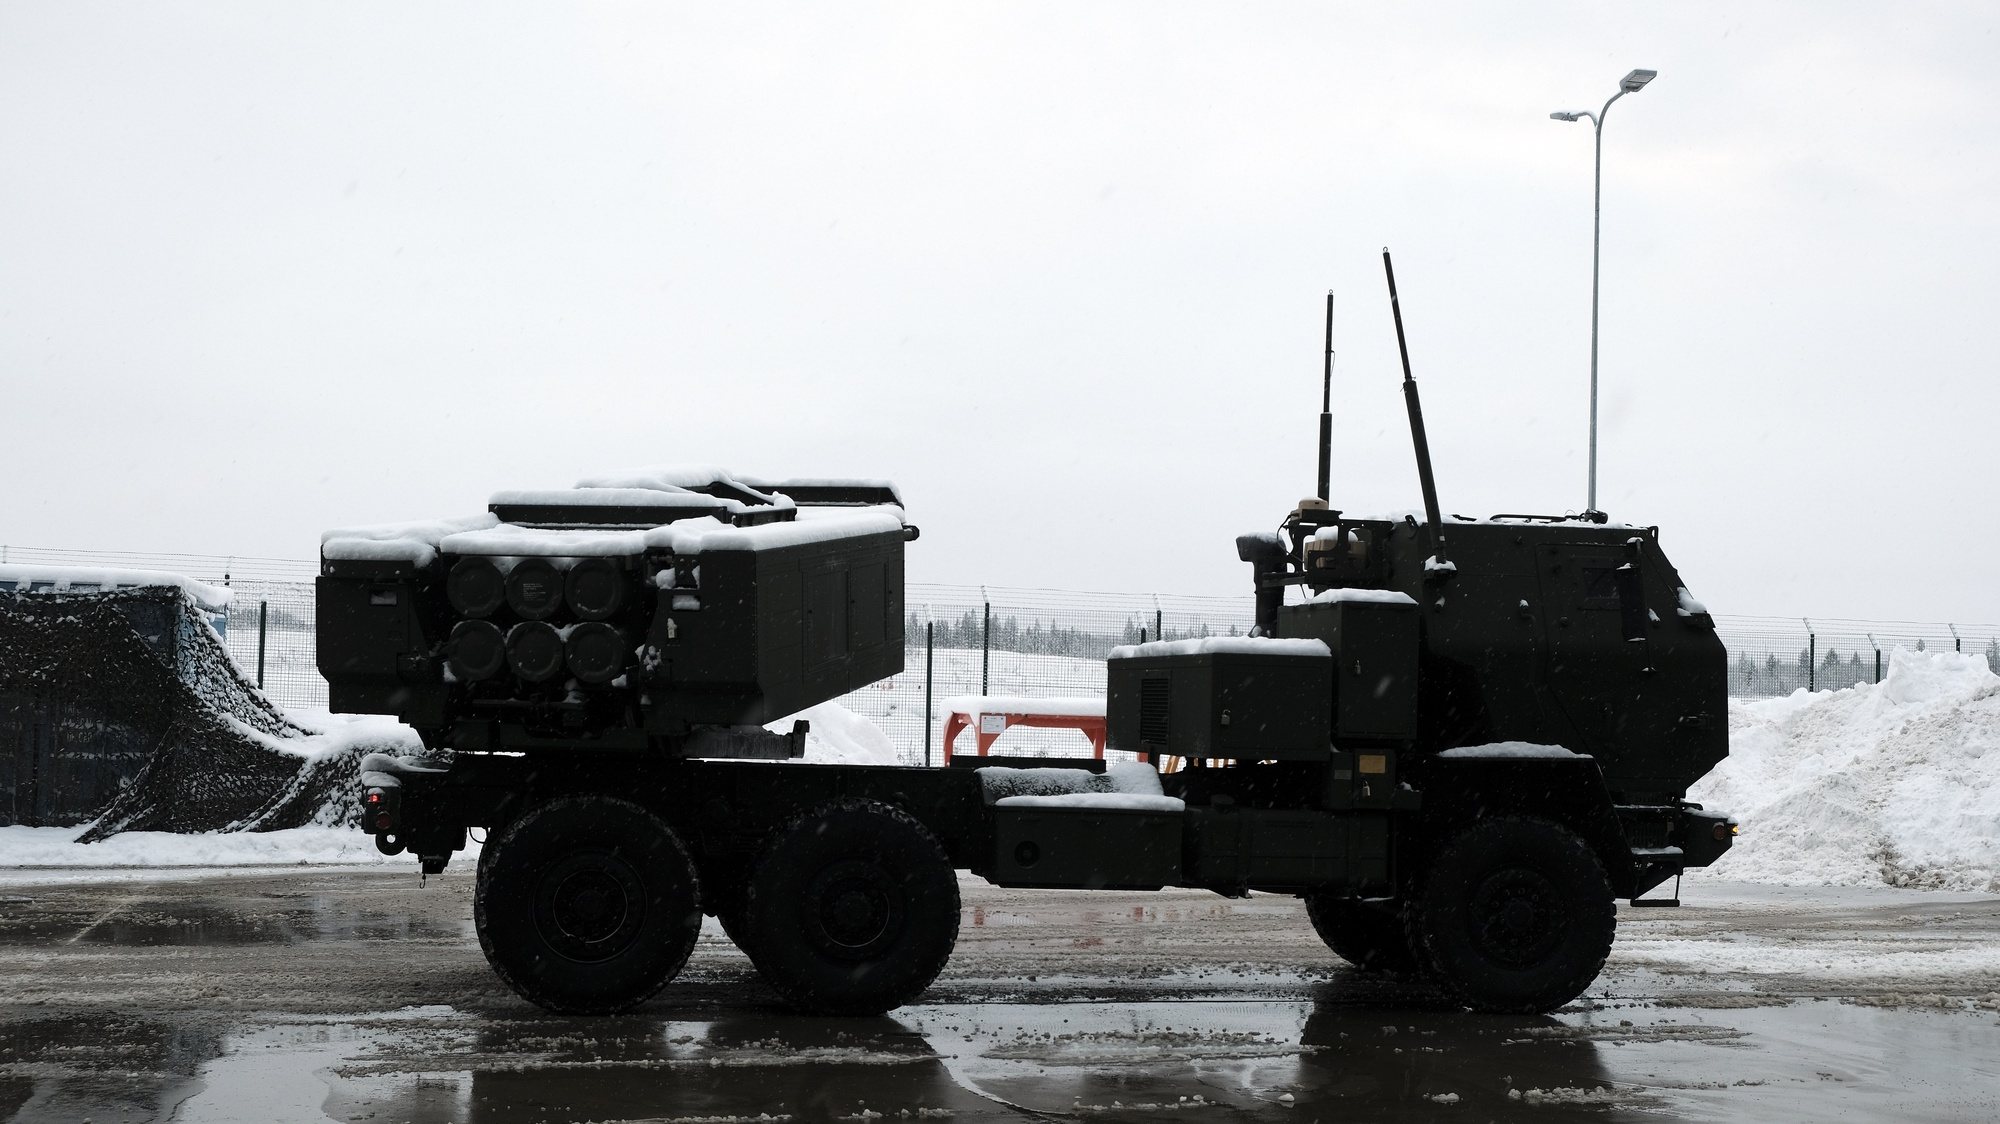 epa10391967 US Army multiple rocket launcher HIMARS performs during the media day at the Tapa military base, Estonia, 06 January 2023. During the event, visitors had the opportunity to get acquainted with the US Army multiple rocket launcher HIMARS, which will enter the Estonian defense force&#039;s arsenal in 2024.  EPA/VALDA KALNINA